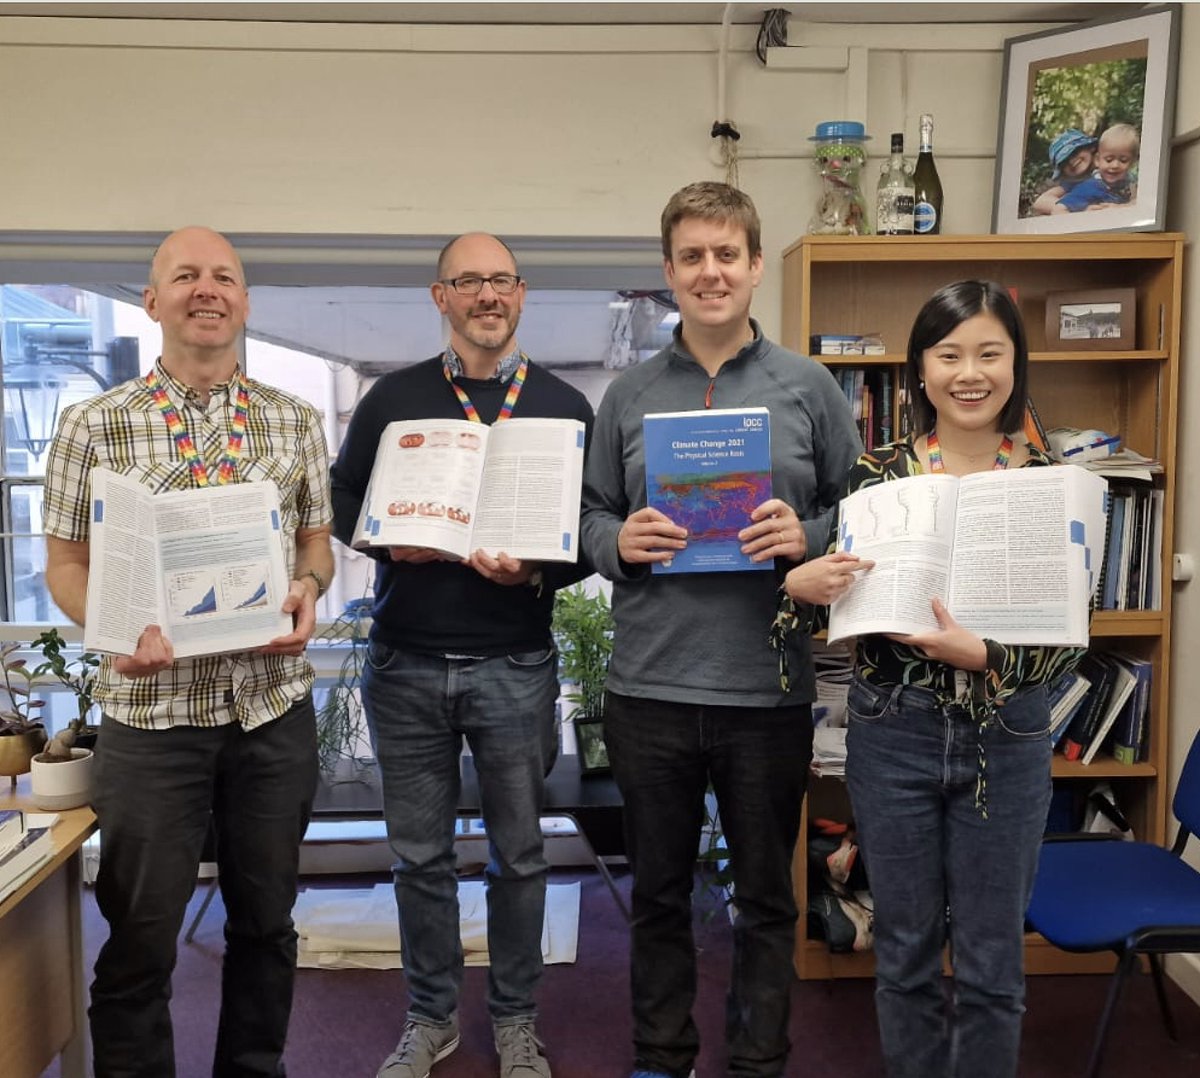 We love seeing our hard work in print. The @IPCC_CH international assessment on climate change arrived in our department day. Here are some of our contributors, showing off the figures we made. @EuniceLoClimate @ClimateDann @ClimateSamwell @mpclimate